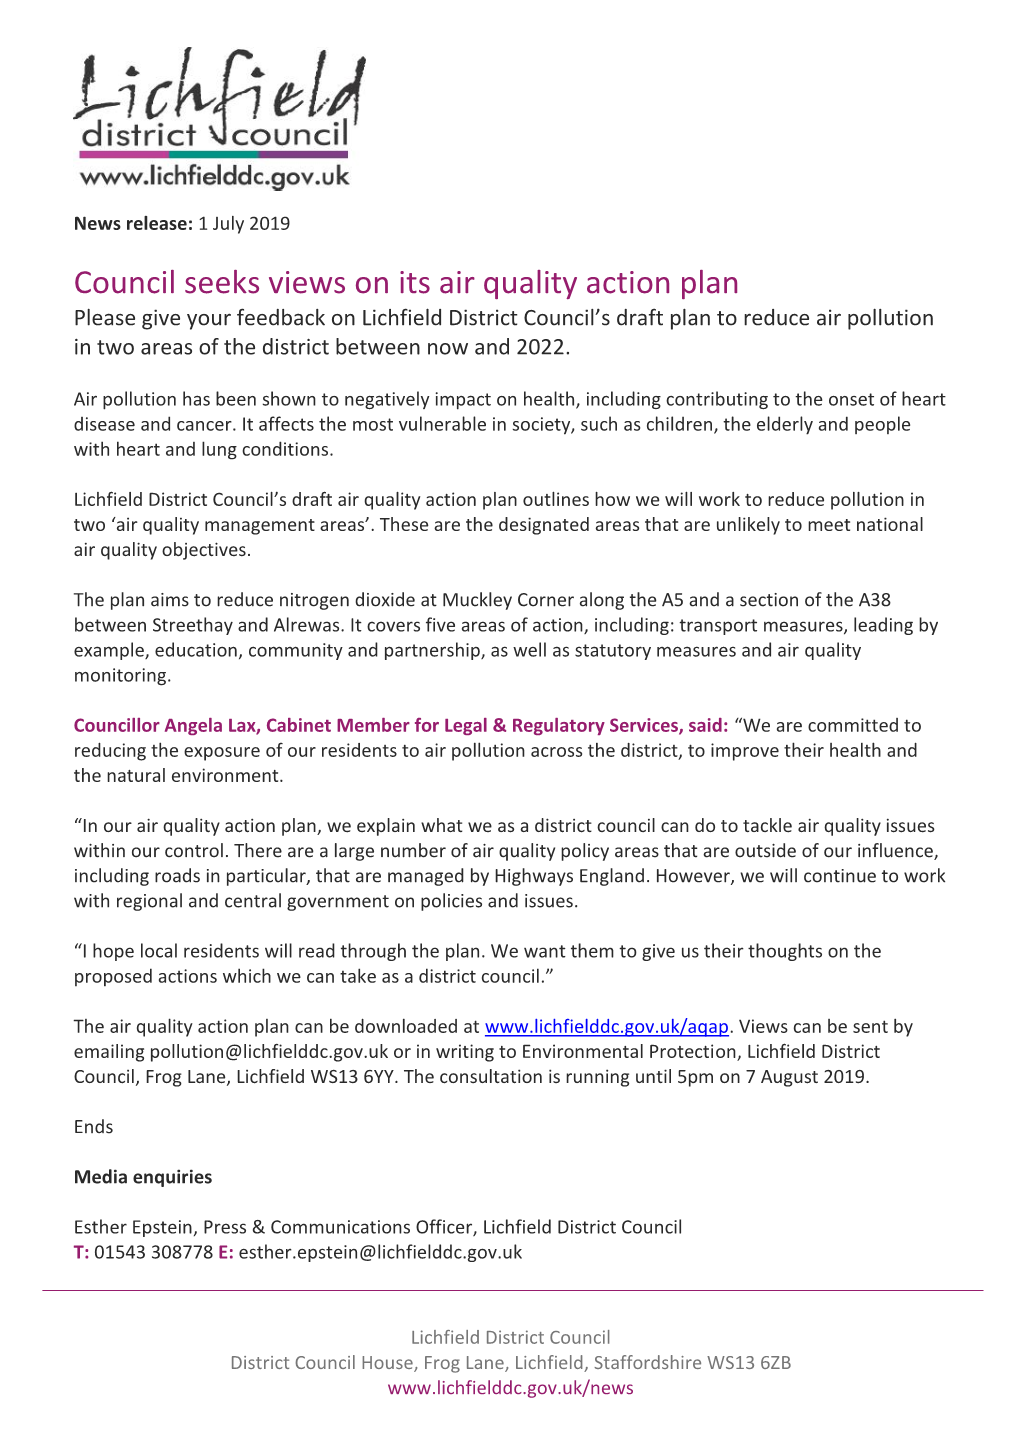 Userfiles/Files/News/Council Seeks Views on Its Air Quality Action Plan.Pdf